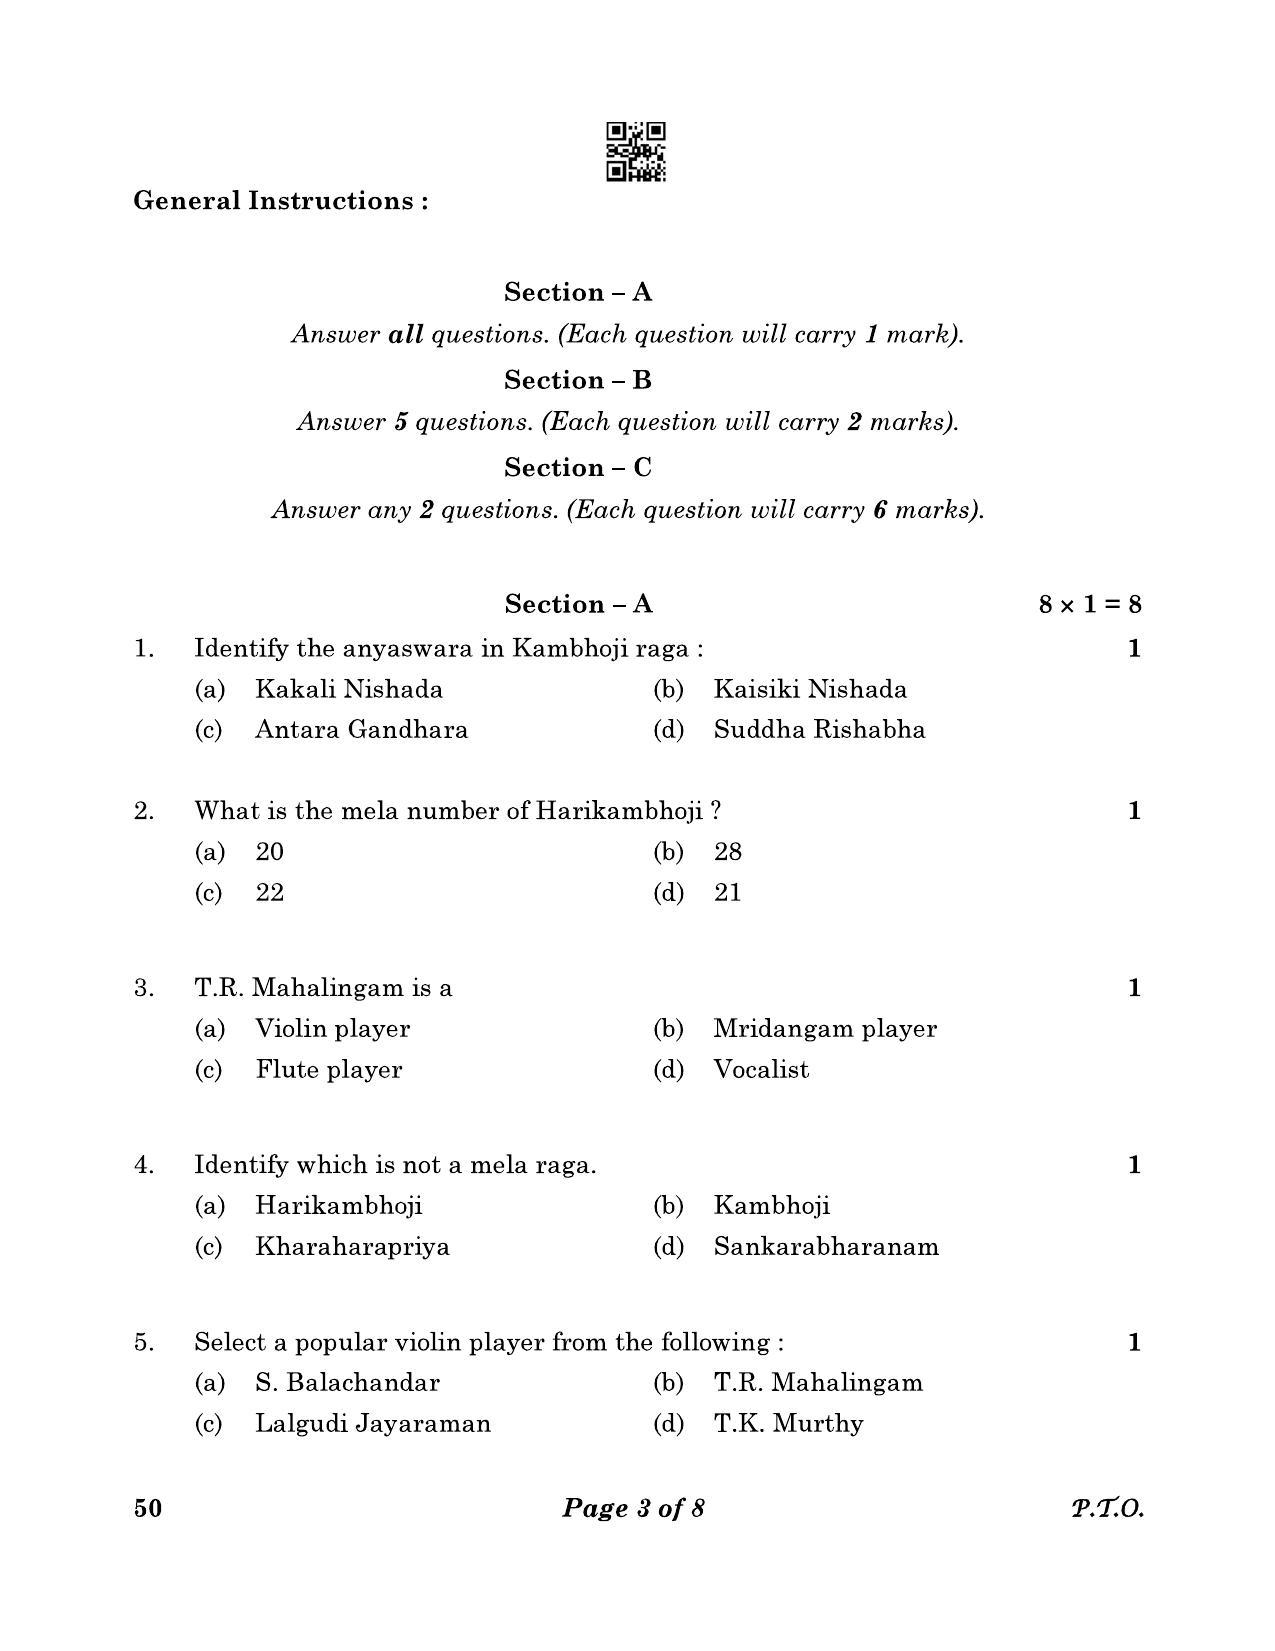 CBSE Class 10 50 CARNATIC MUSIC (Melodic Instruments) (Theory) 2023 Question Paper - Page 3